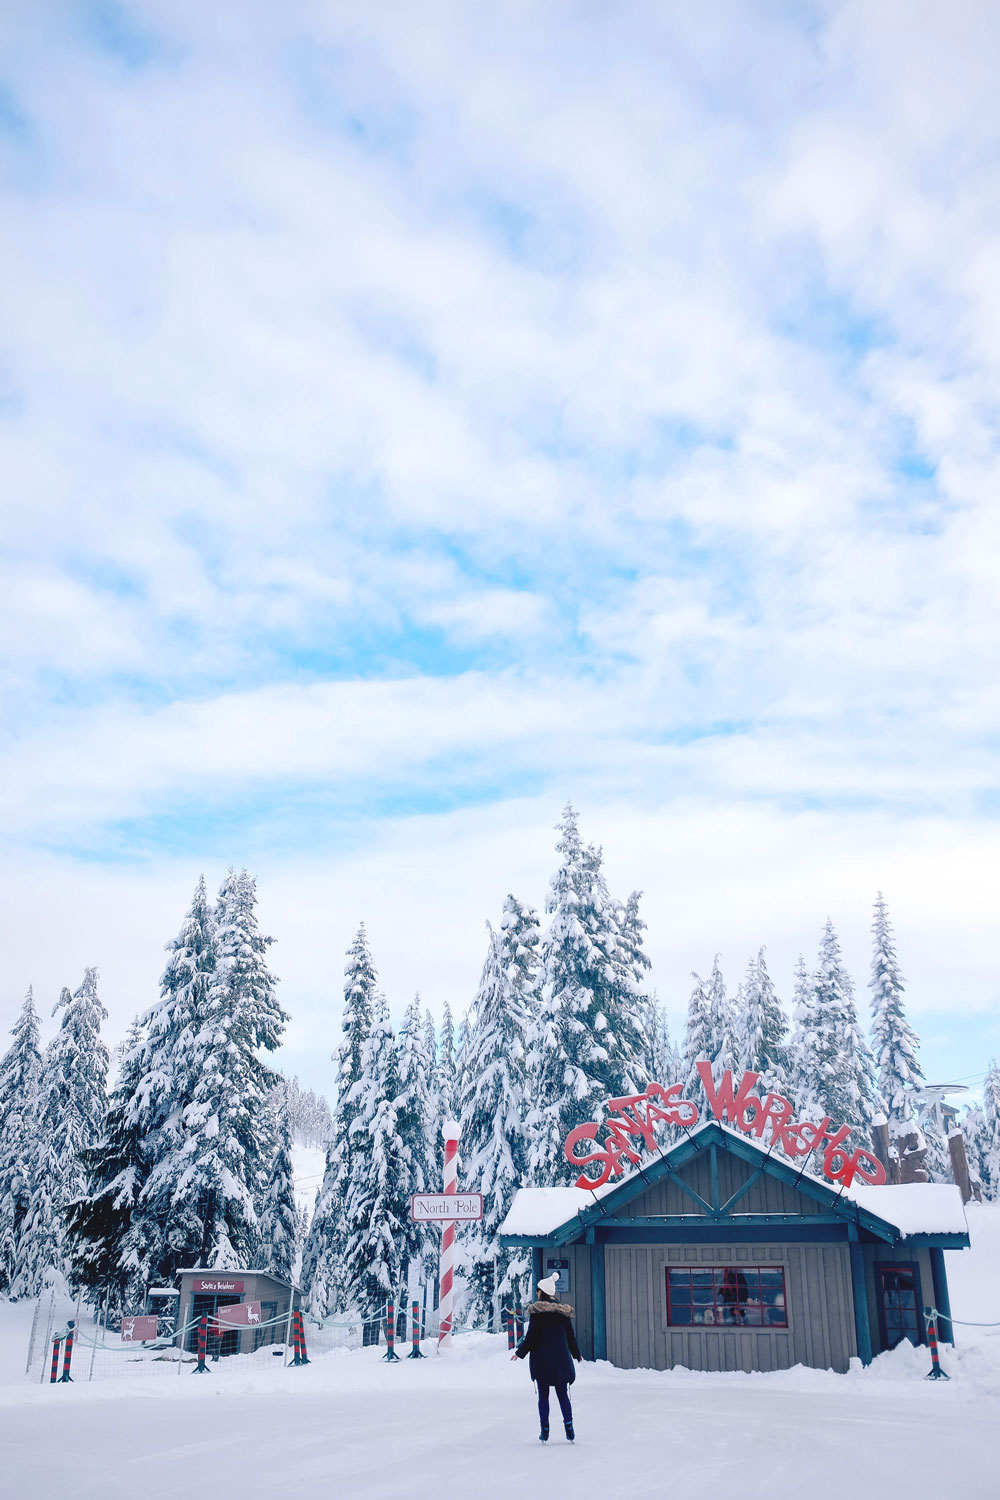 Things to do in Vancouver at Christmas - Grouse Mountain Peak of Christmas ice skating, snowshoeing and skiing